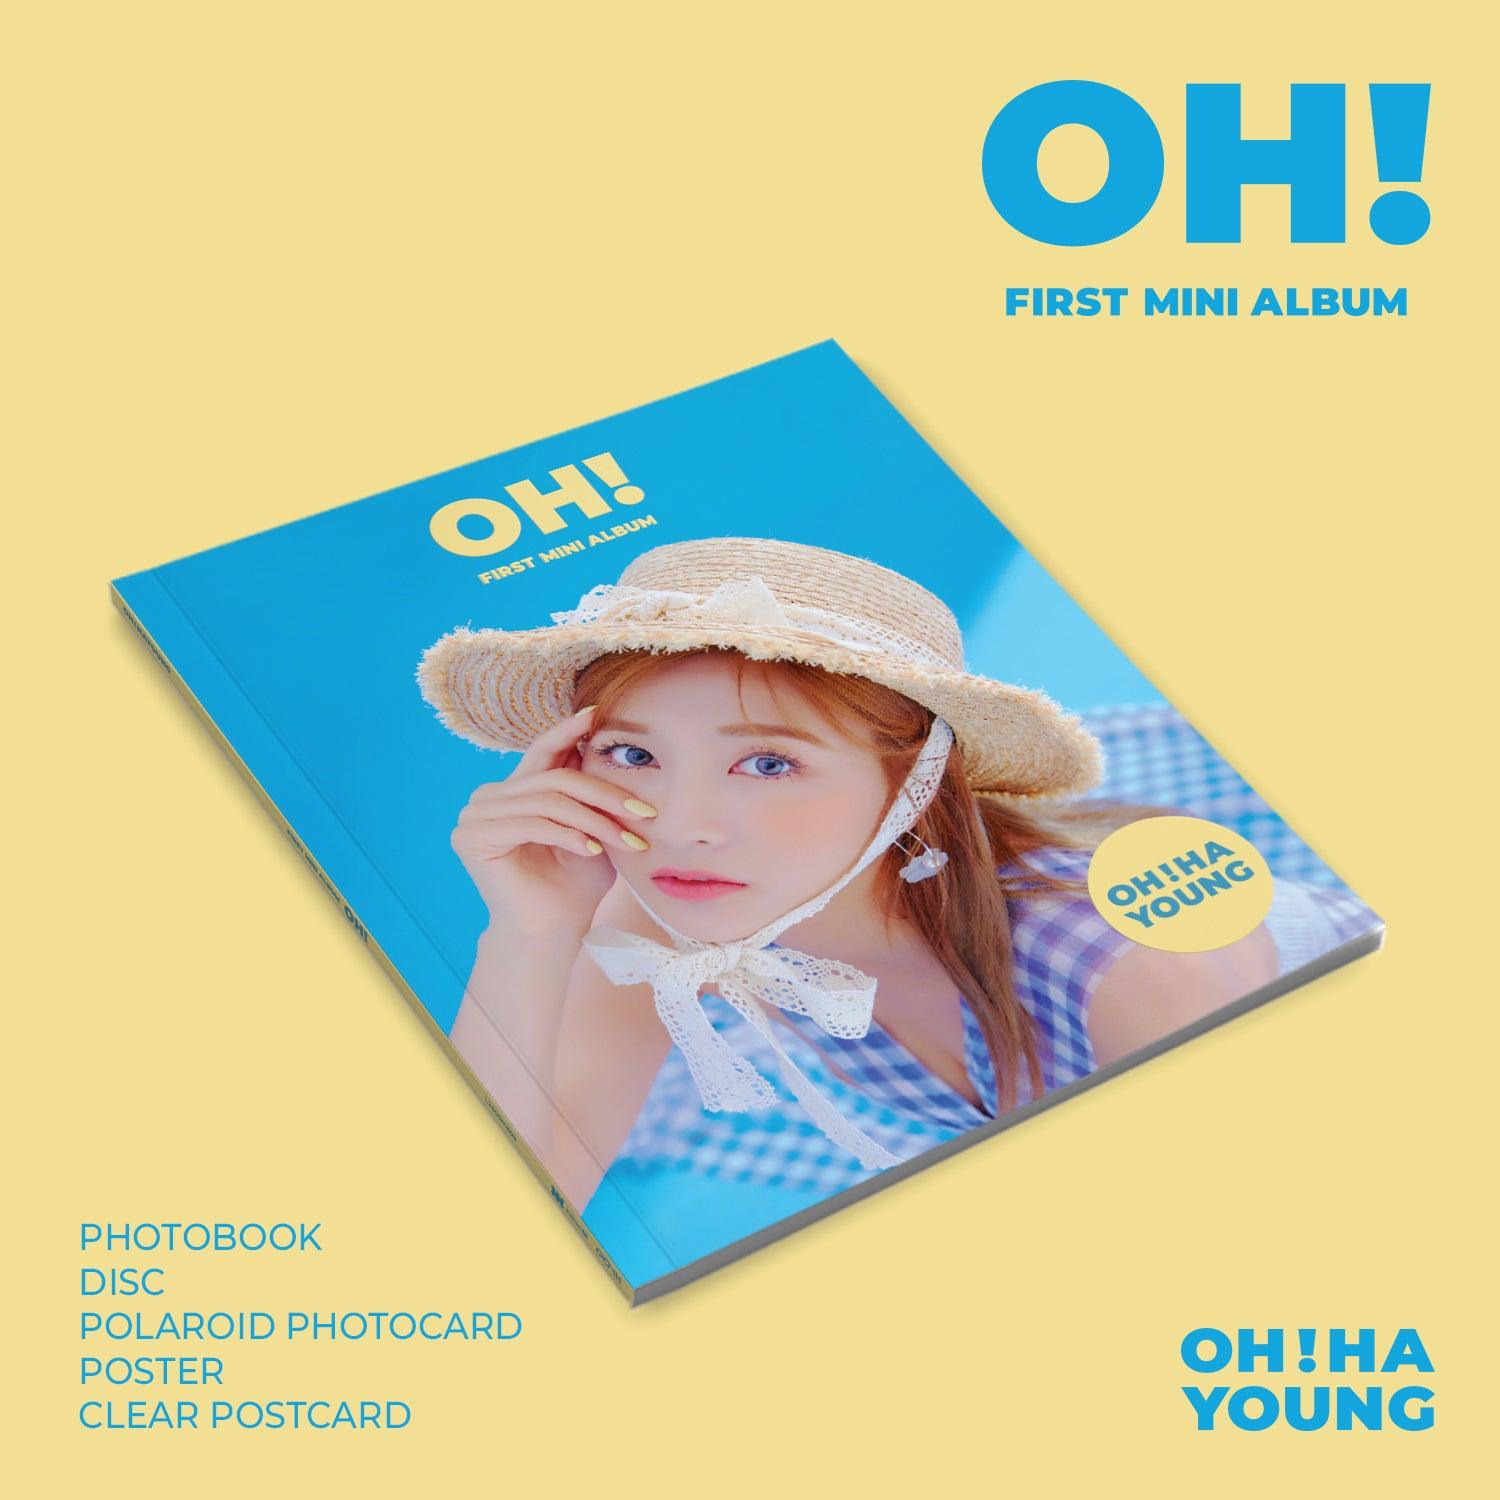 OH! HA YOUNG (APINK) 1ST MINI ALBUM 'OH!'